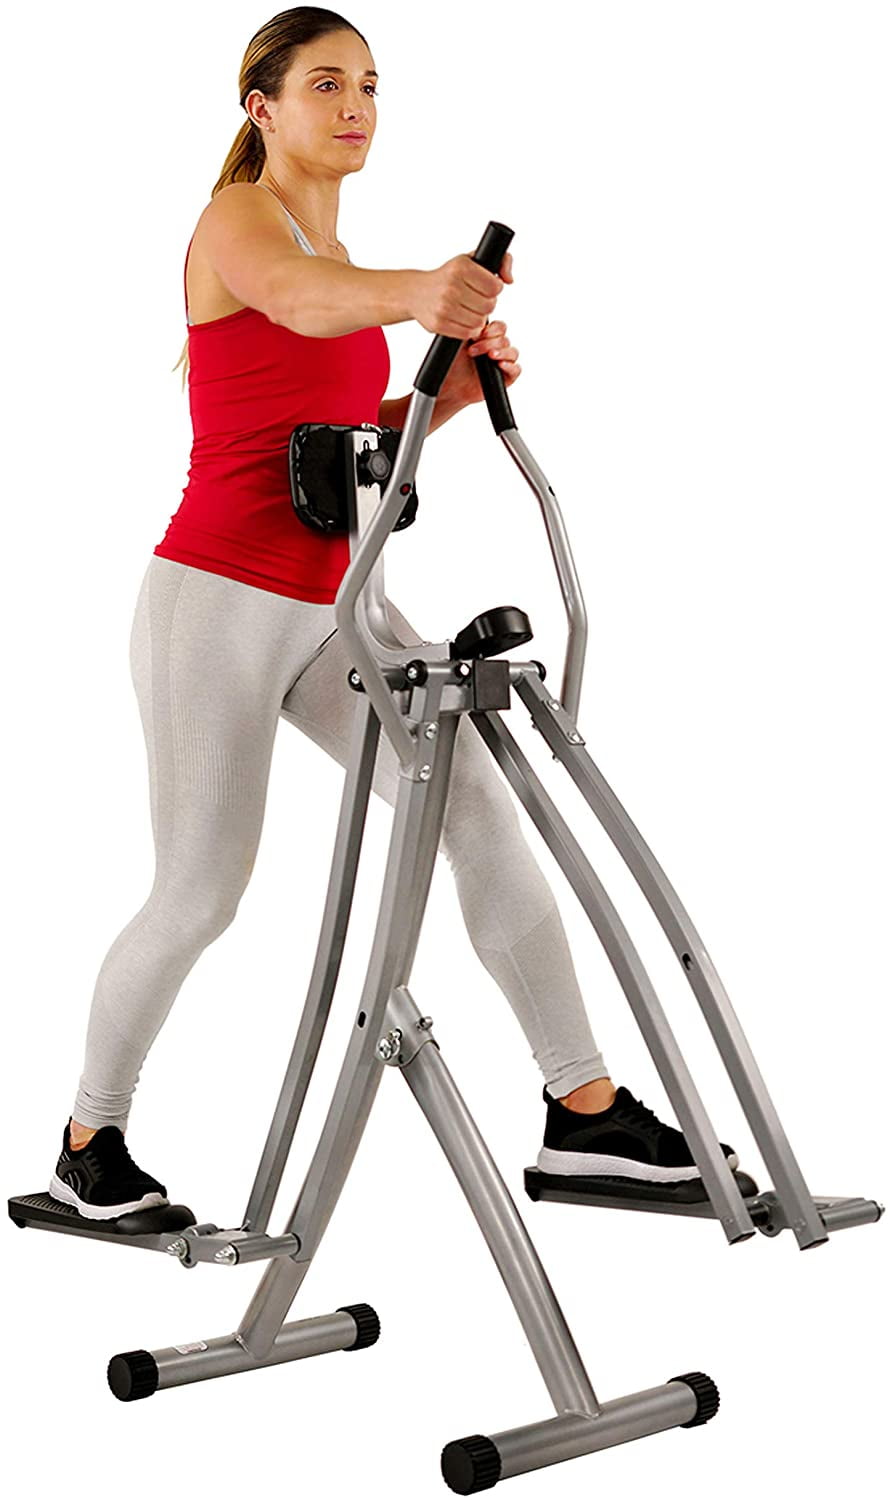 Fitness Home Workout Air Walkers Glider Elliptical Exercise Machine Widen Stride 